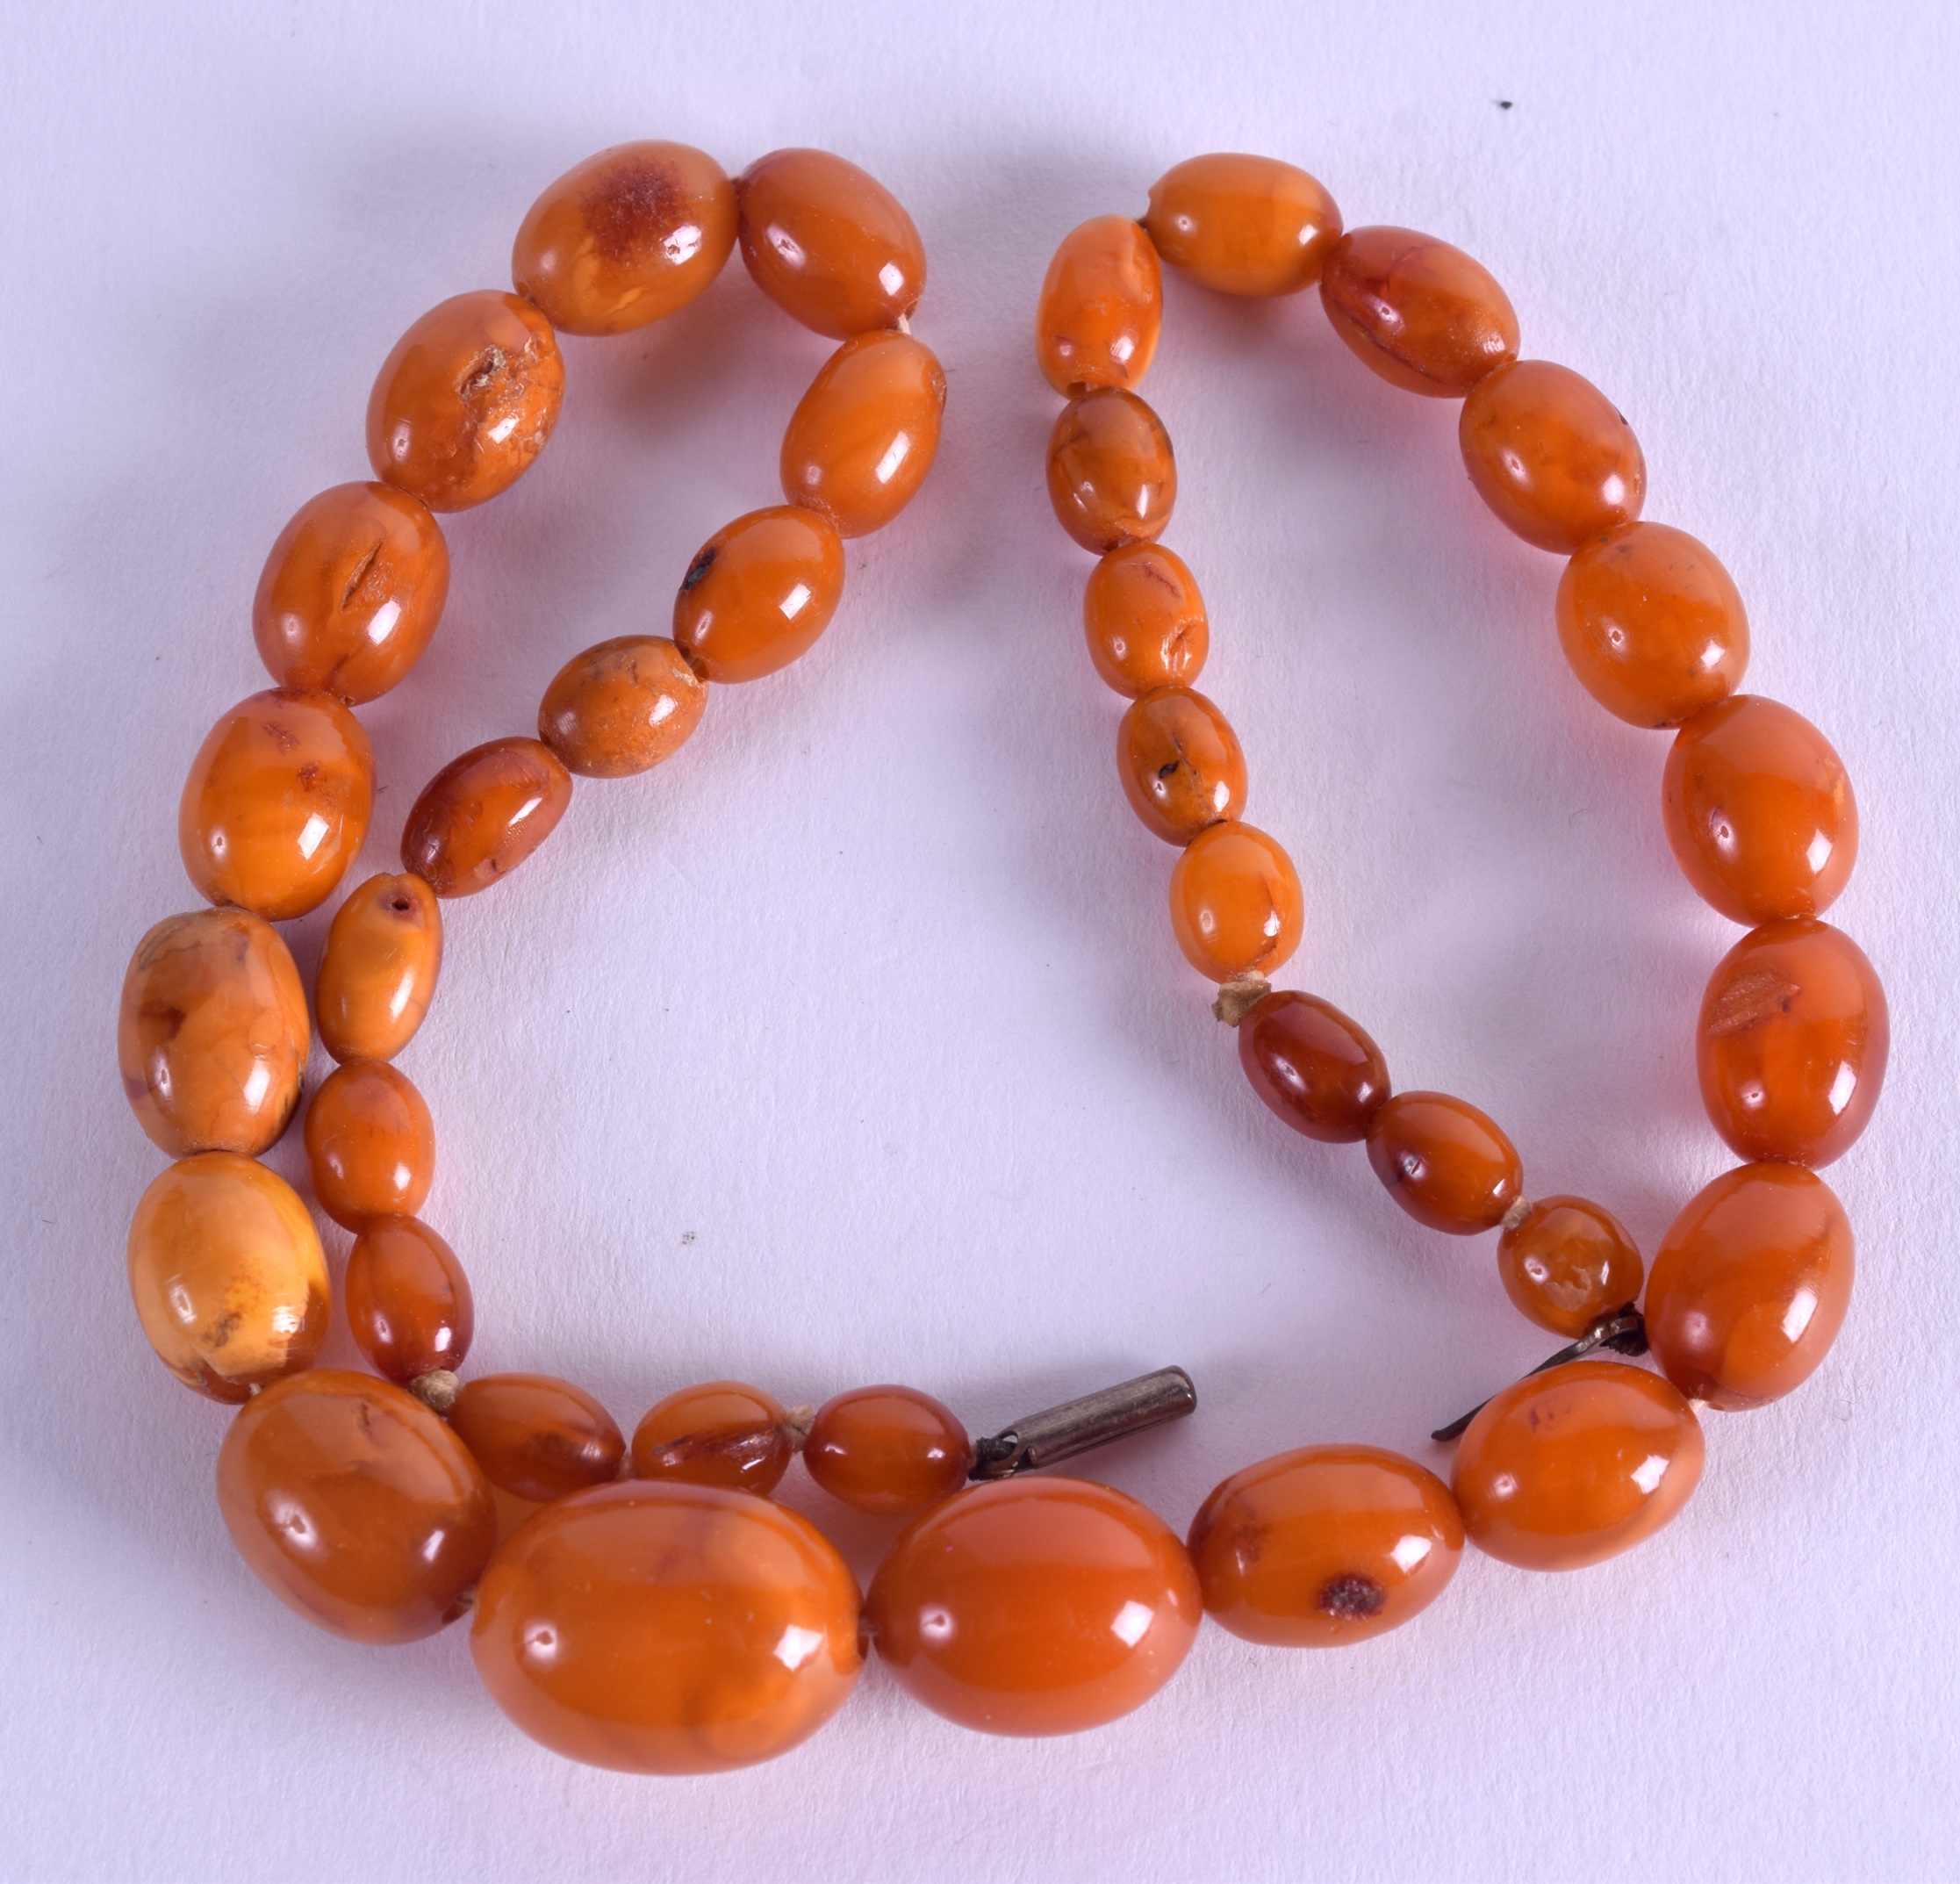 AN AMBER NECKLACE. 20 grams. 42 cm long, largest bead 1.75 cm wide.